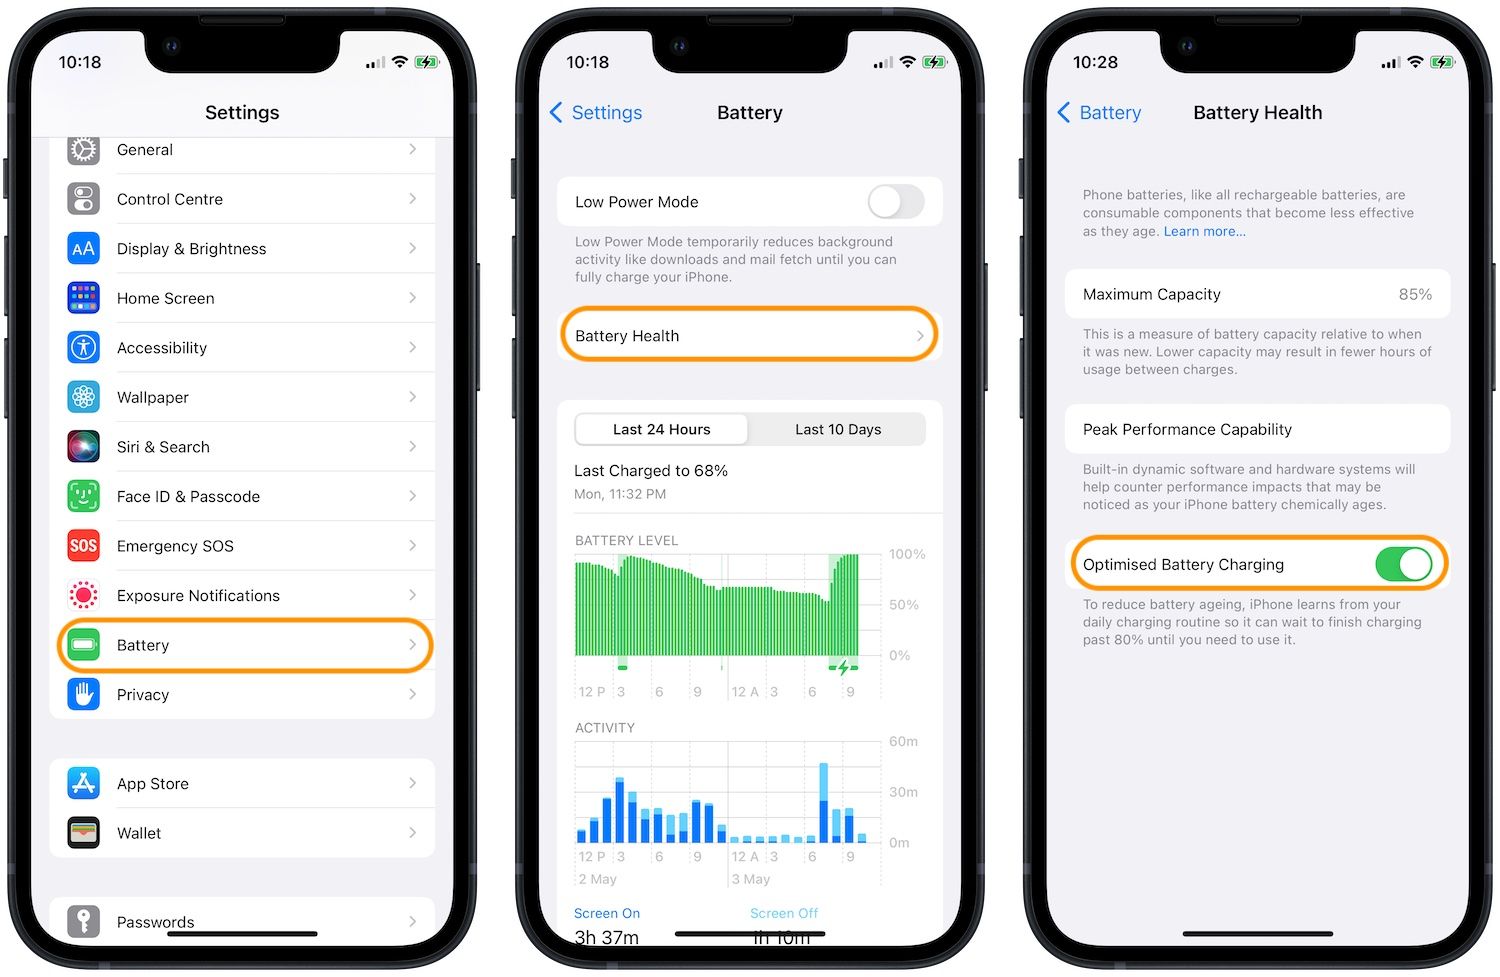 Enable Optimized Battery Charging on iPhone